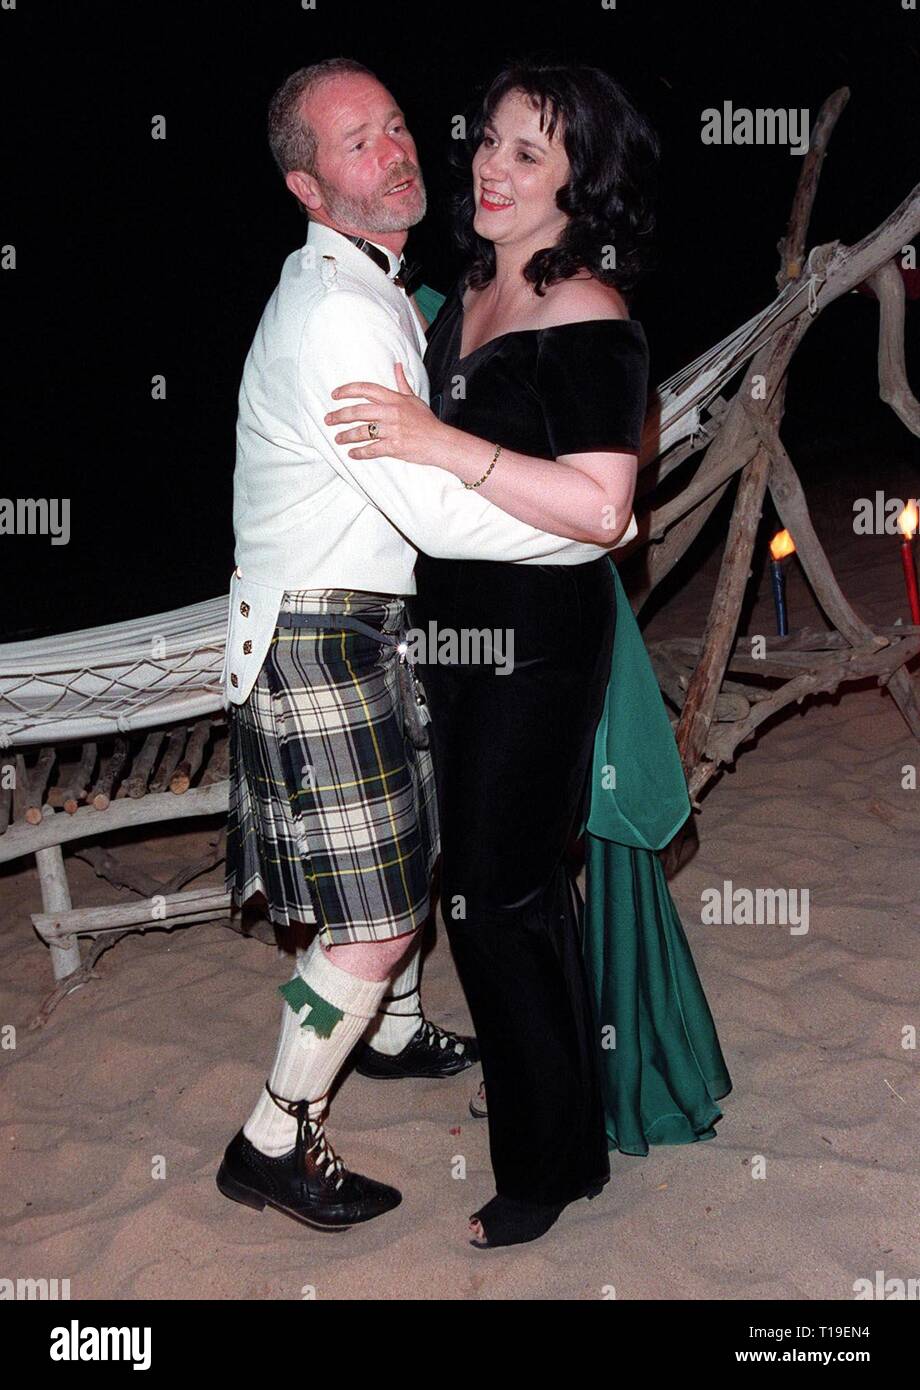 CANNES, FRANCE - May 24, 1998:  Cannes Best Actor winner PETER MULLAN celebrates his award by dancing on the beach with his wife ANNIE. Stock Photo